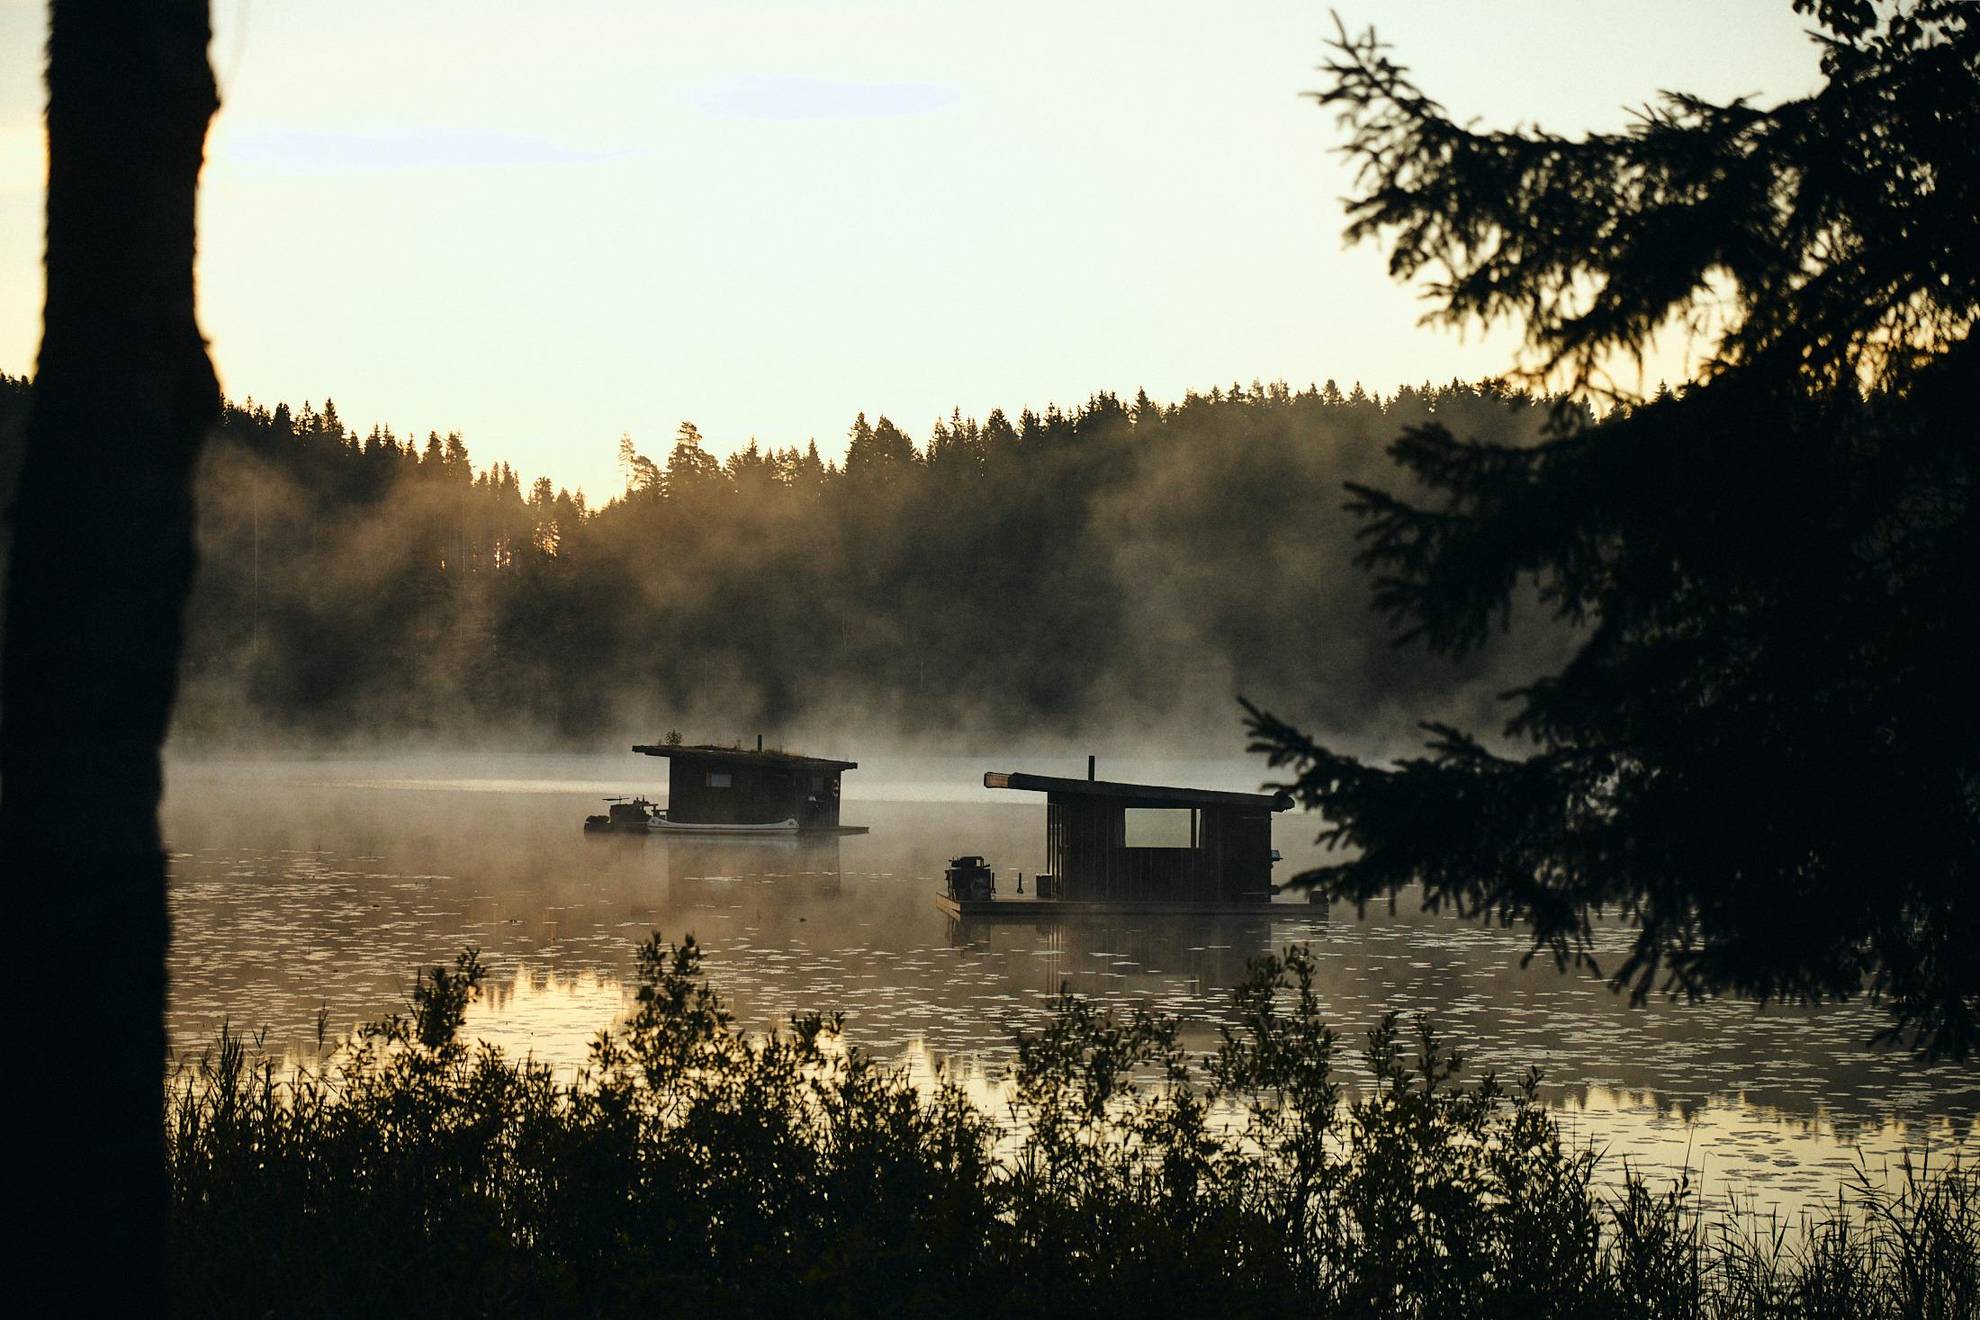 Two wooden houseboats on a foggy lake.